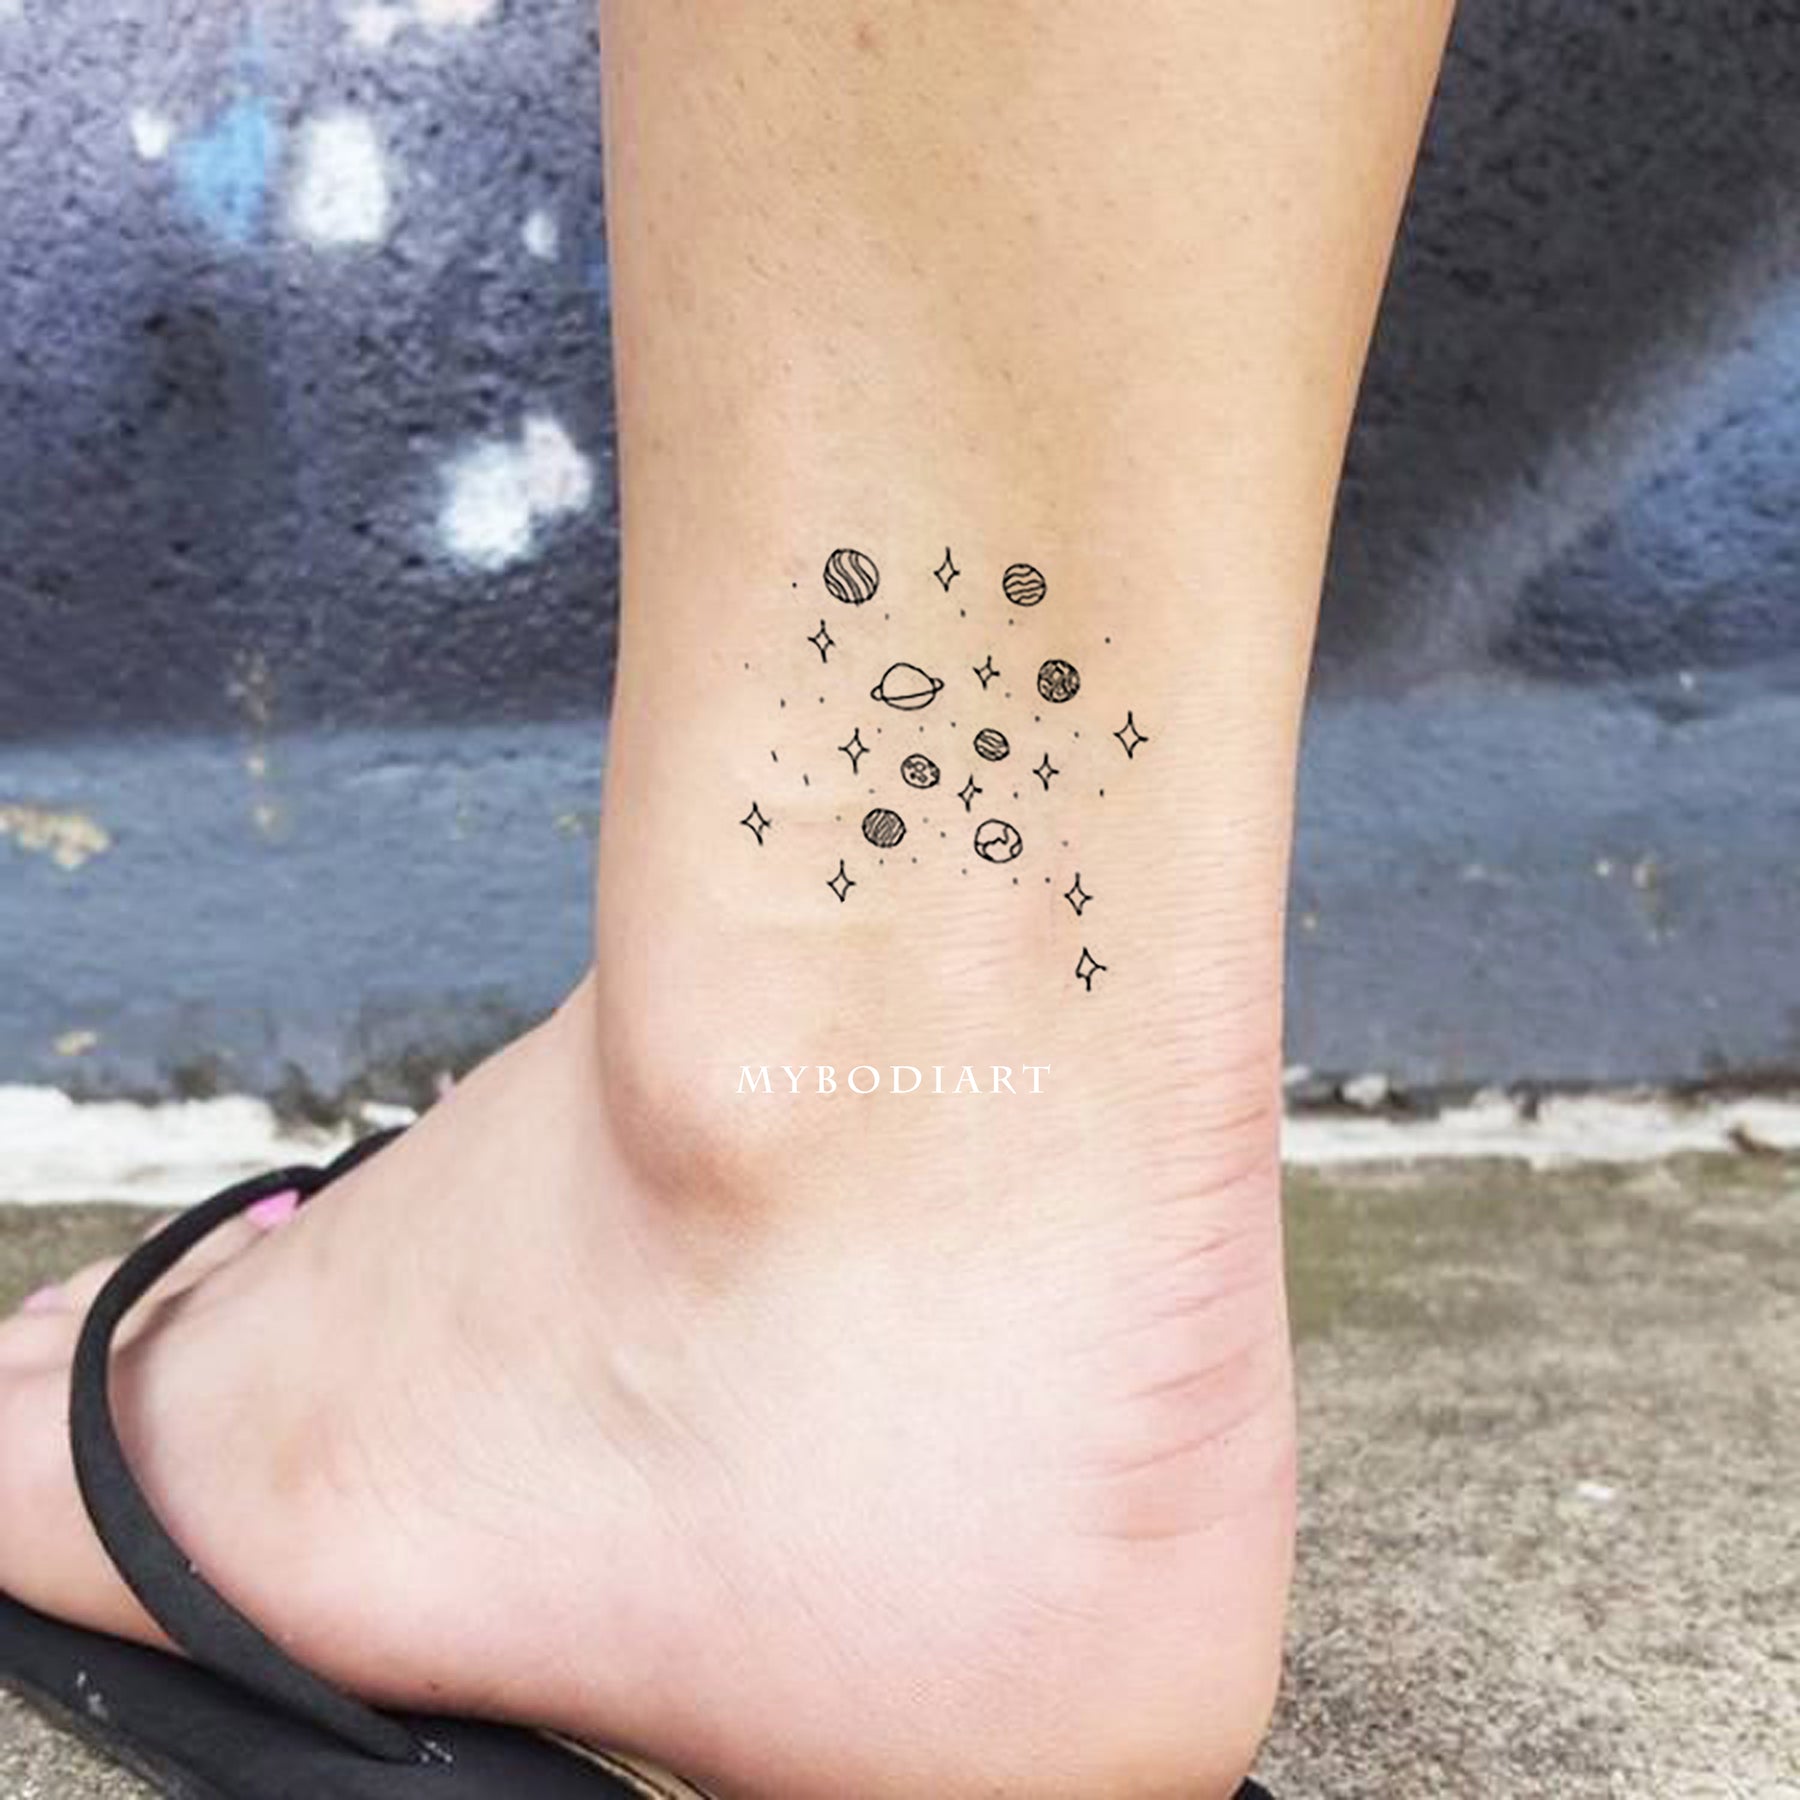 OXEL Tattoo  Cute galaxy detail on the wrist to finish the week Thanks  Evgeniya   Facebook